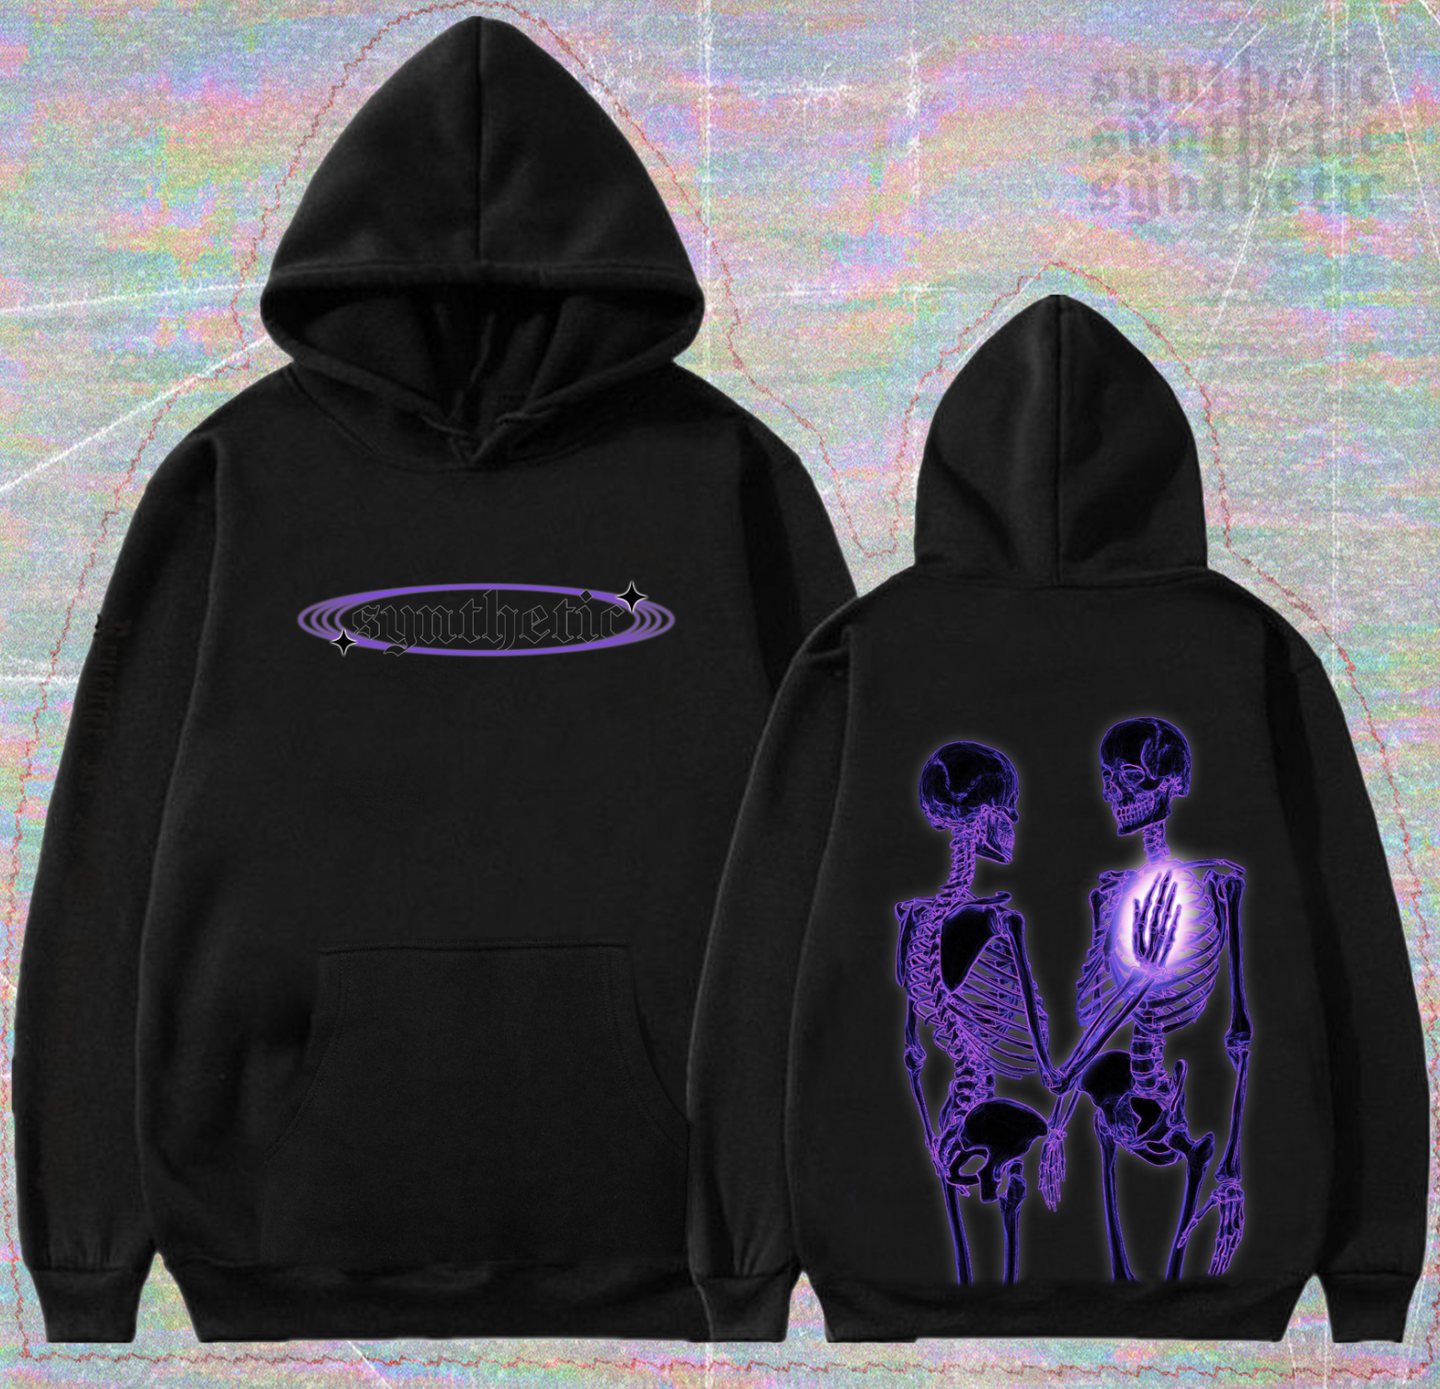 'the wound is where the light enters' hoodie